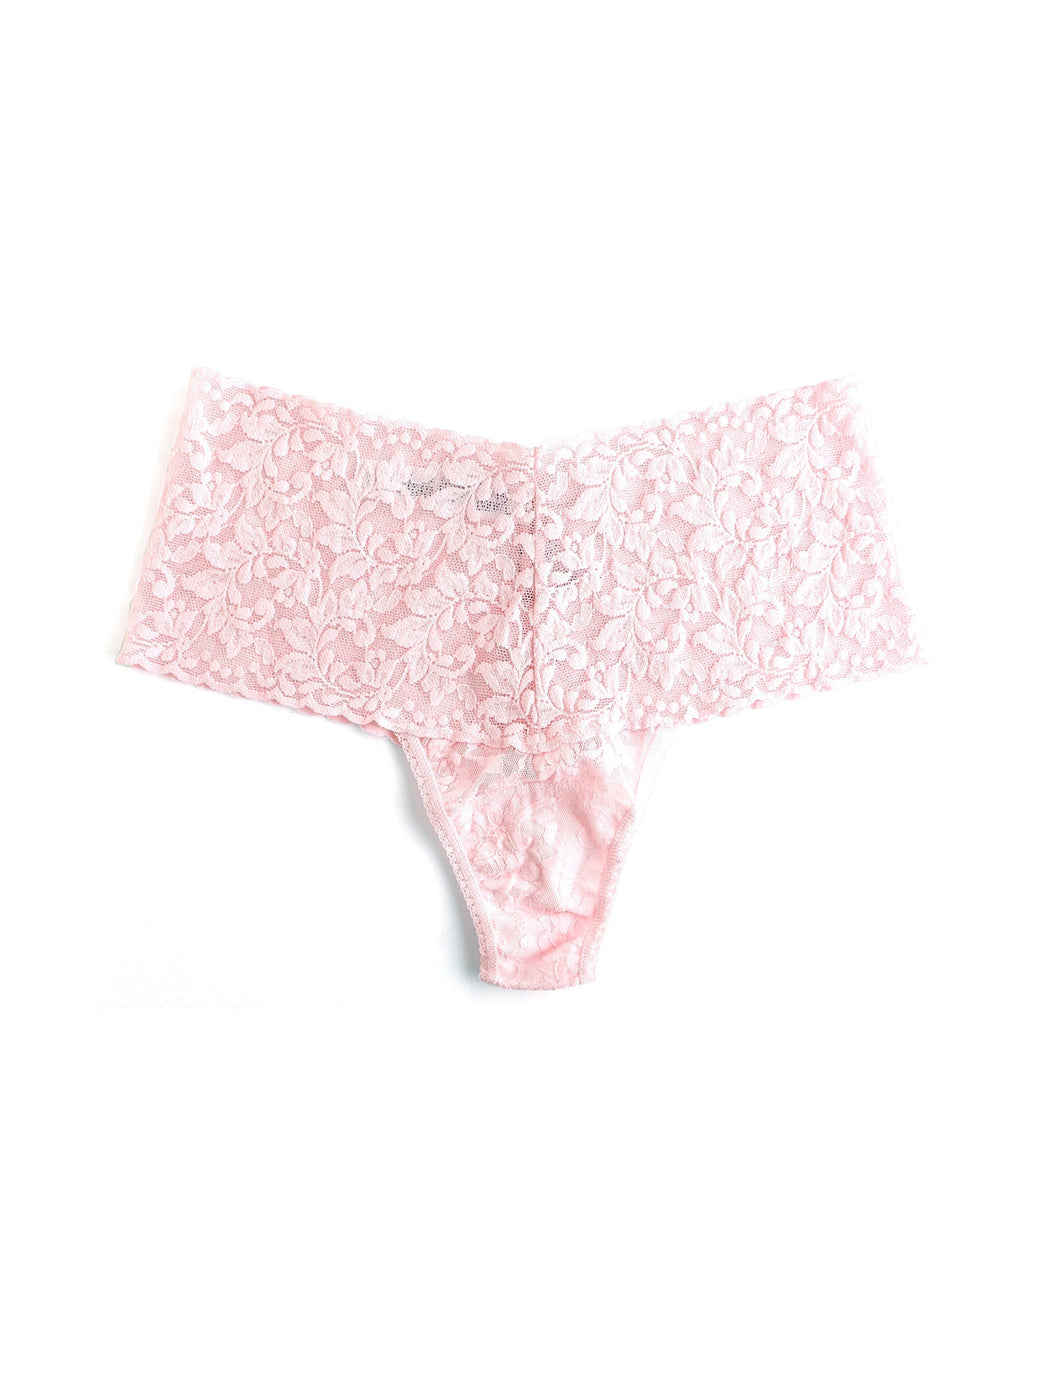 Retro Lace Thong-BLISS PINK-Hanky Panky